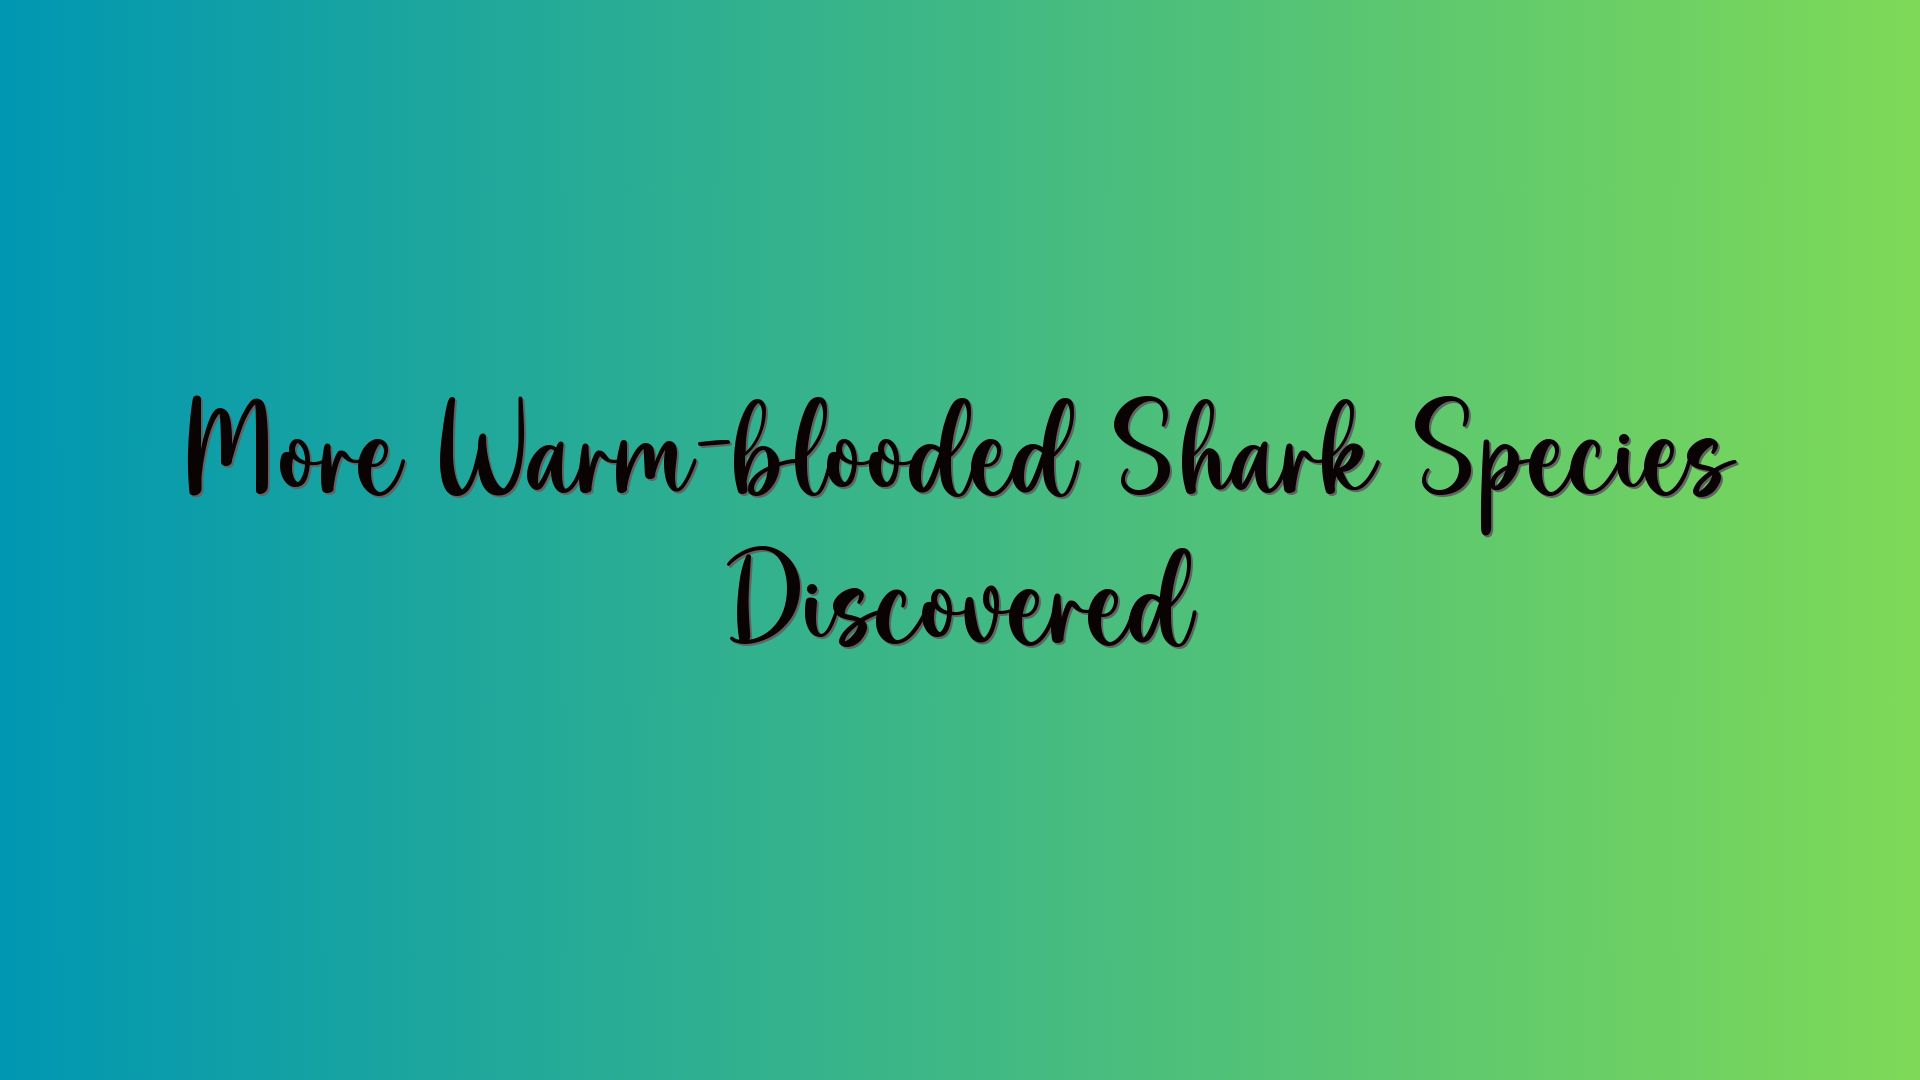 More Warm-blooded Shark Species Discovered